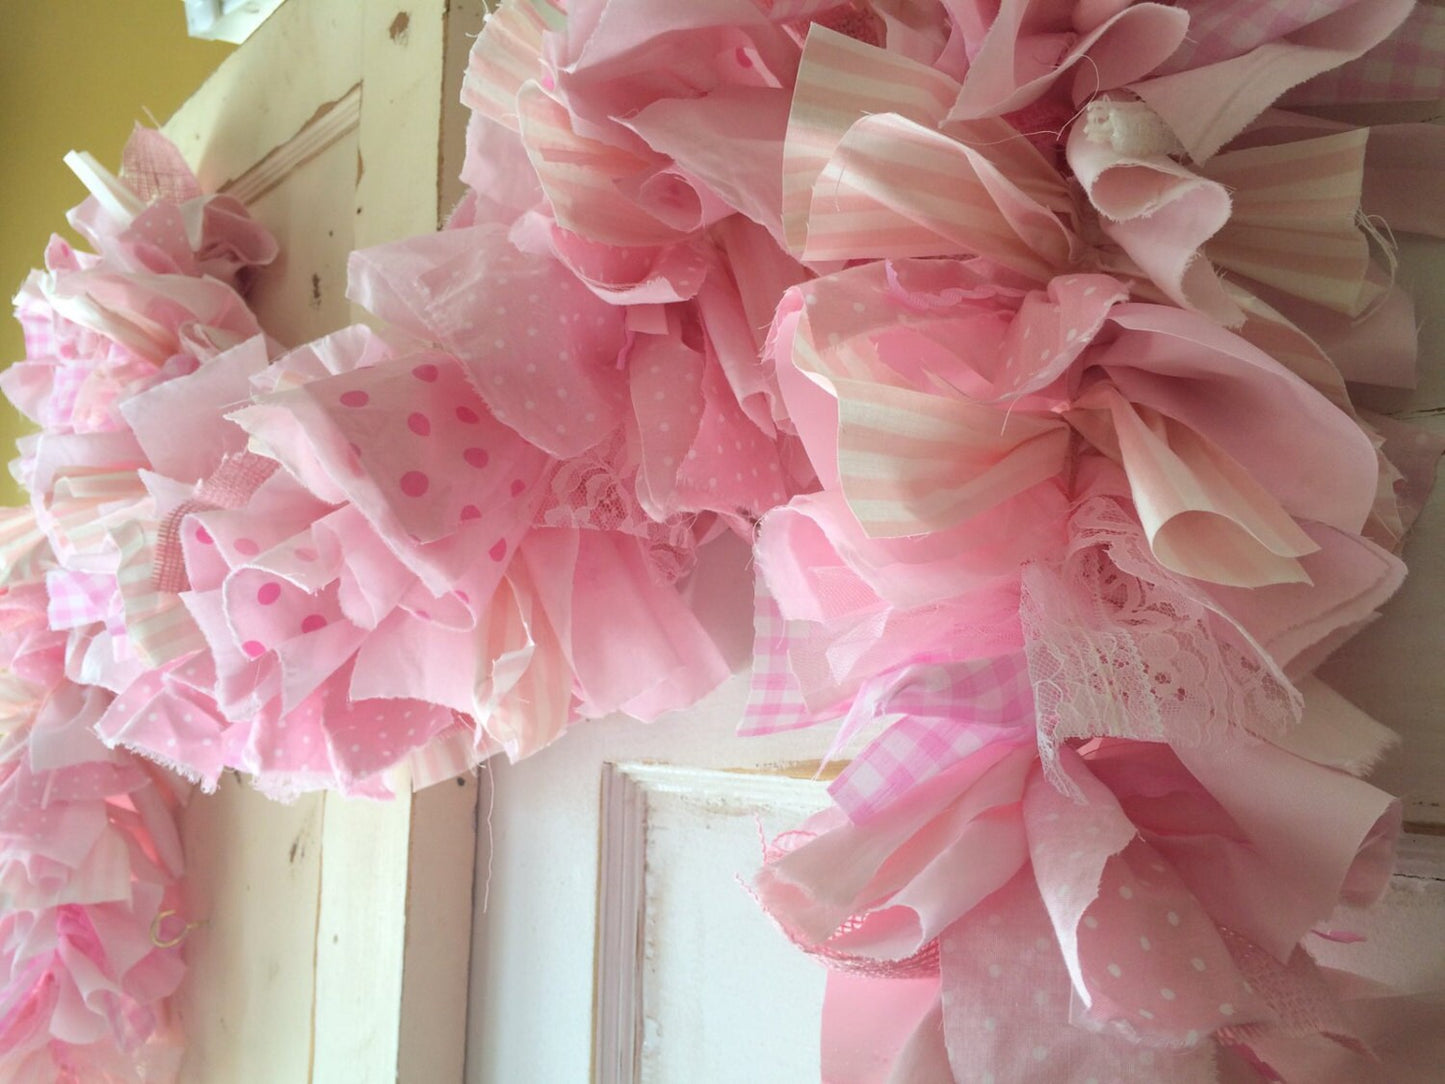 Baby Girl Shower Decoration Pink fabric Garland Banner.  Handmade 6-10 Feet Unique Party Backdrop.  Made to Order